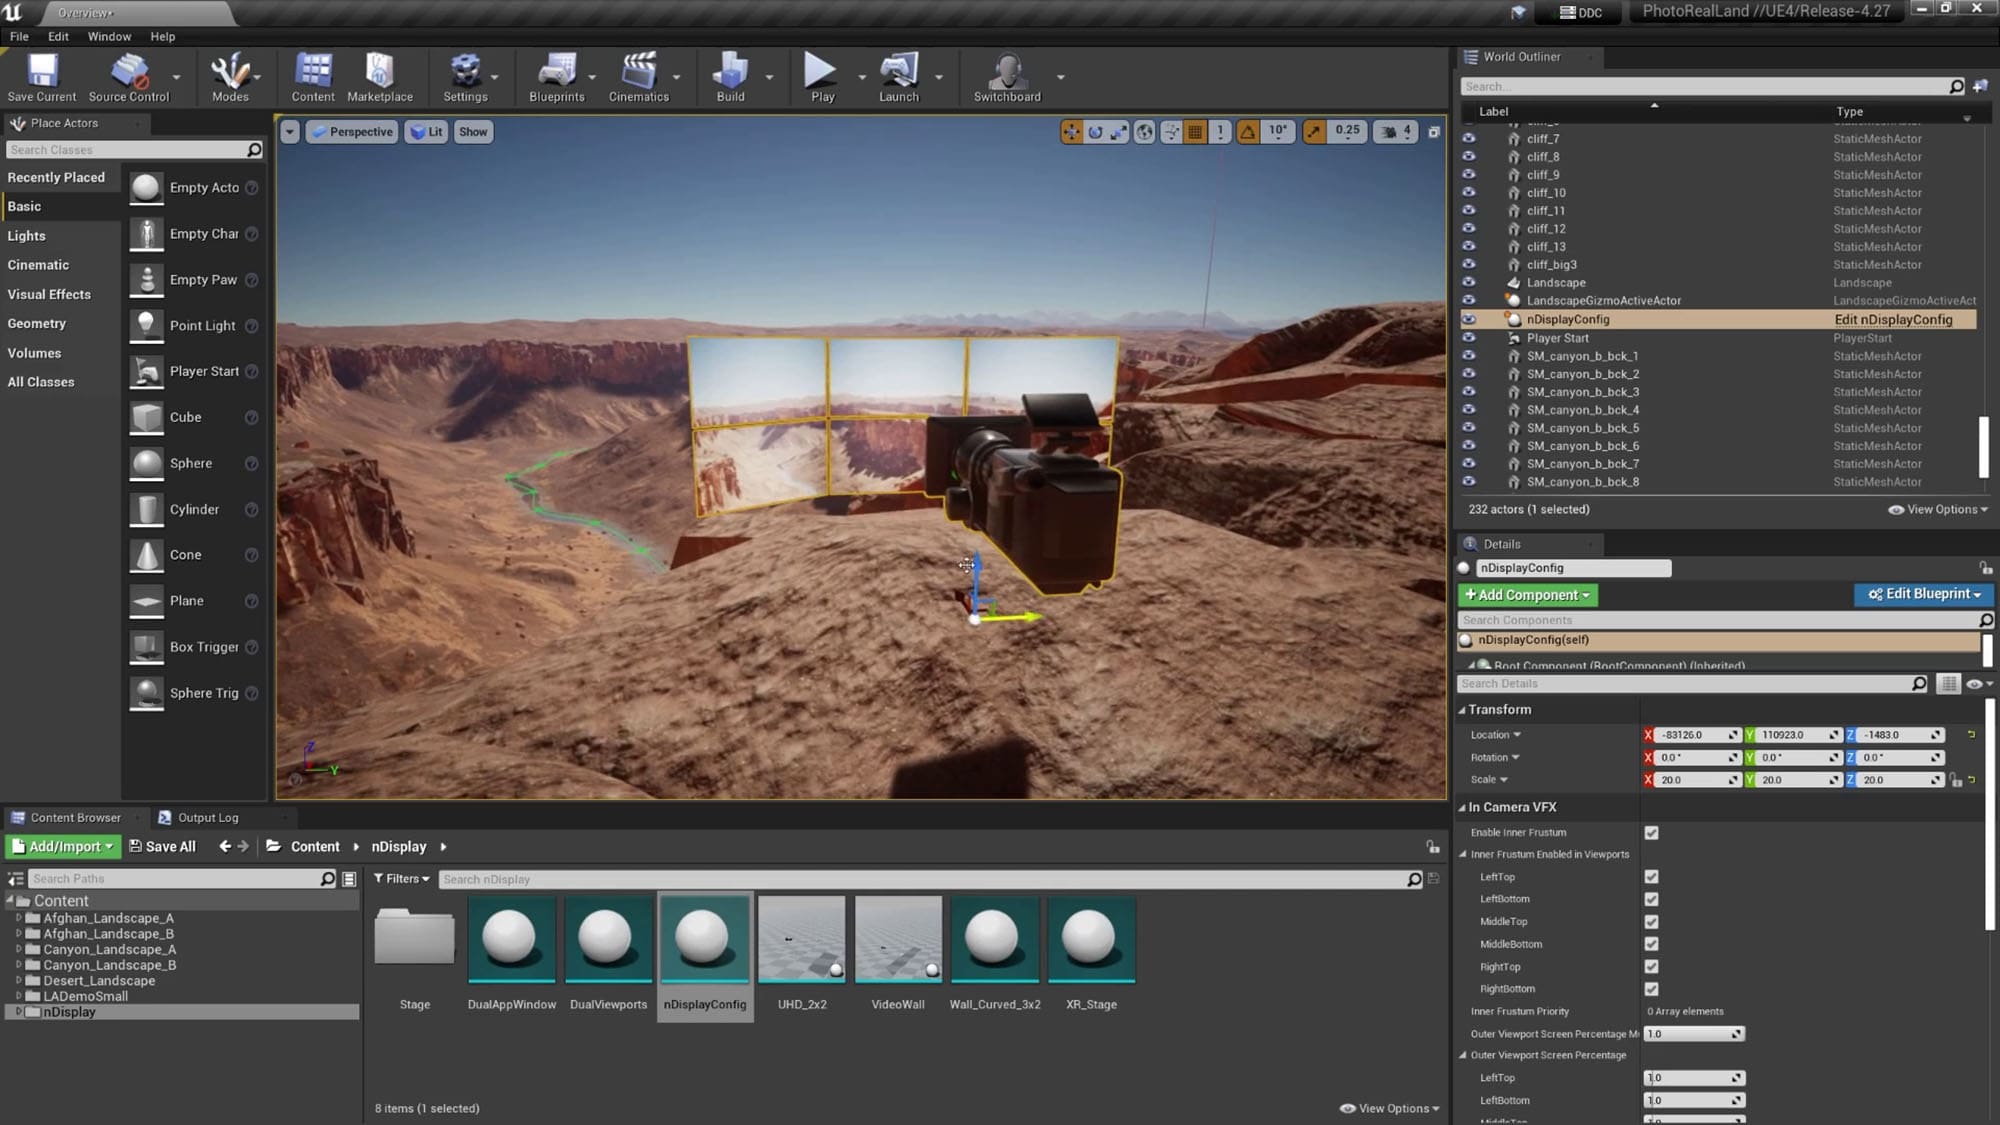 Improvements to Virtual Production in Unreal Engine 4 – fxguide